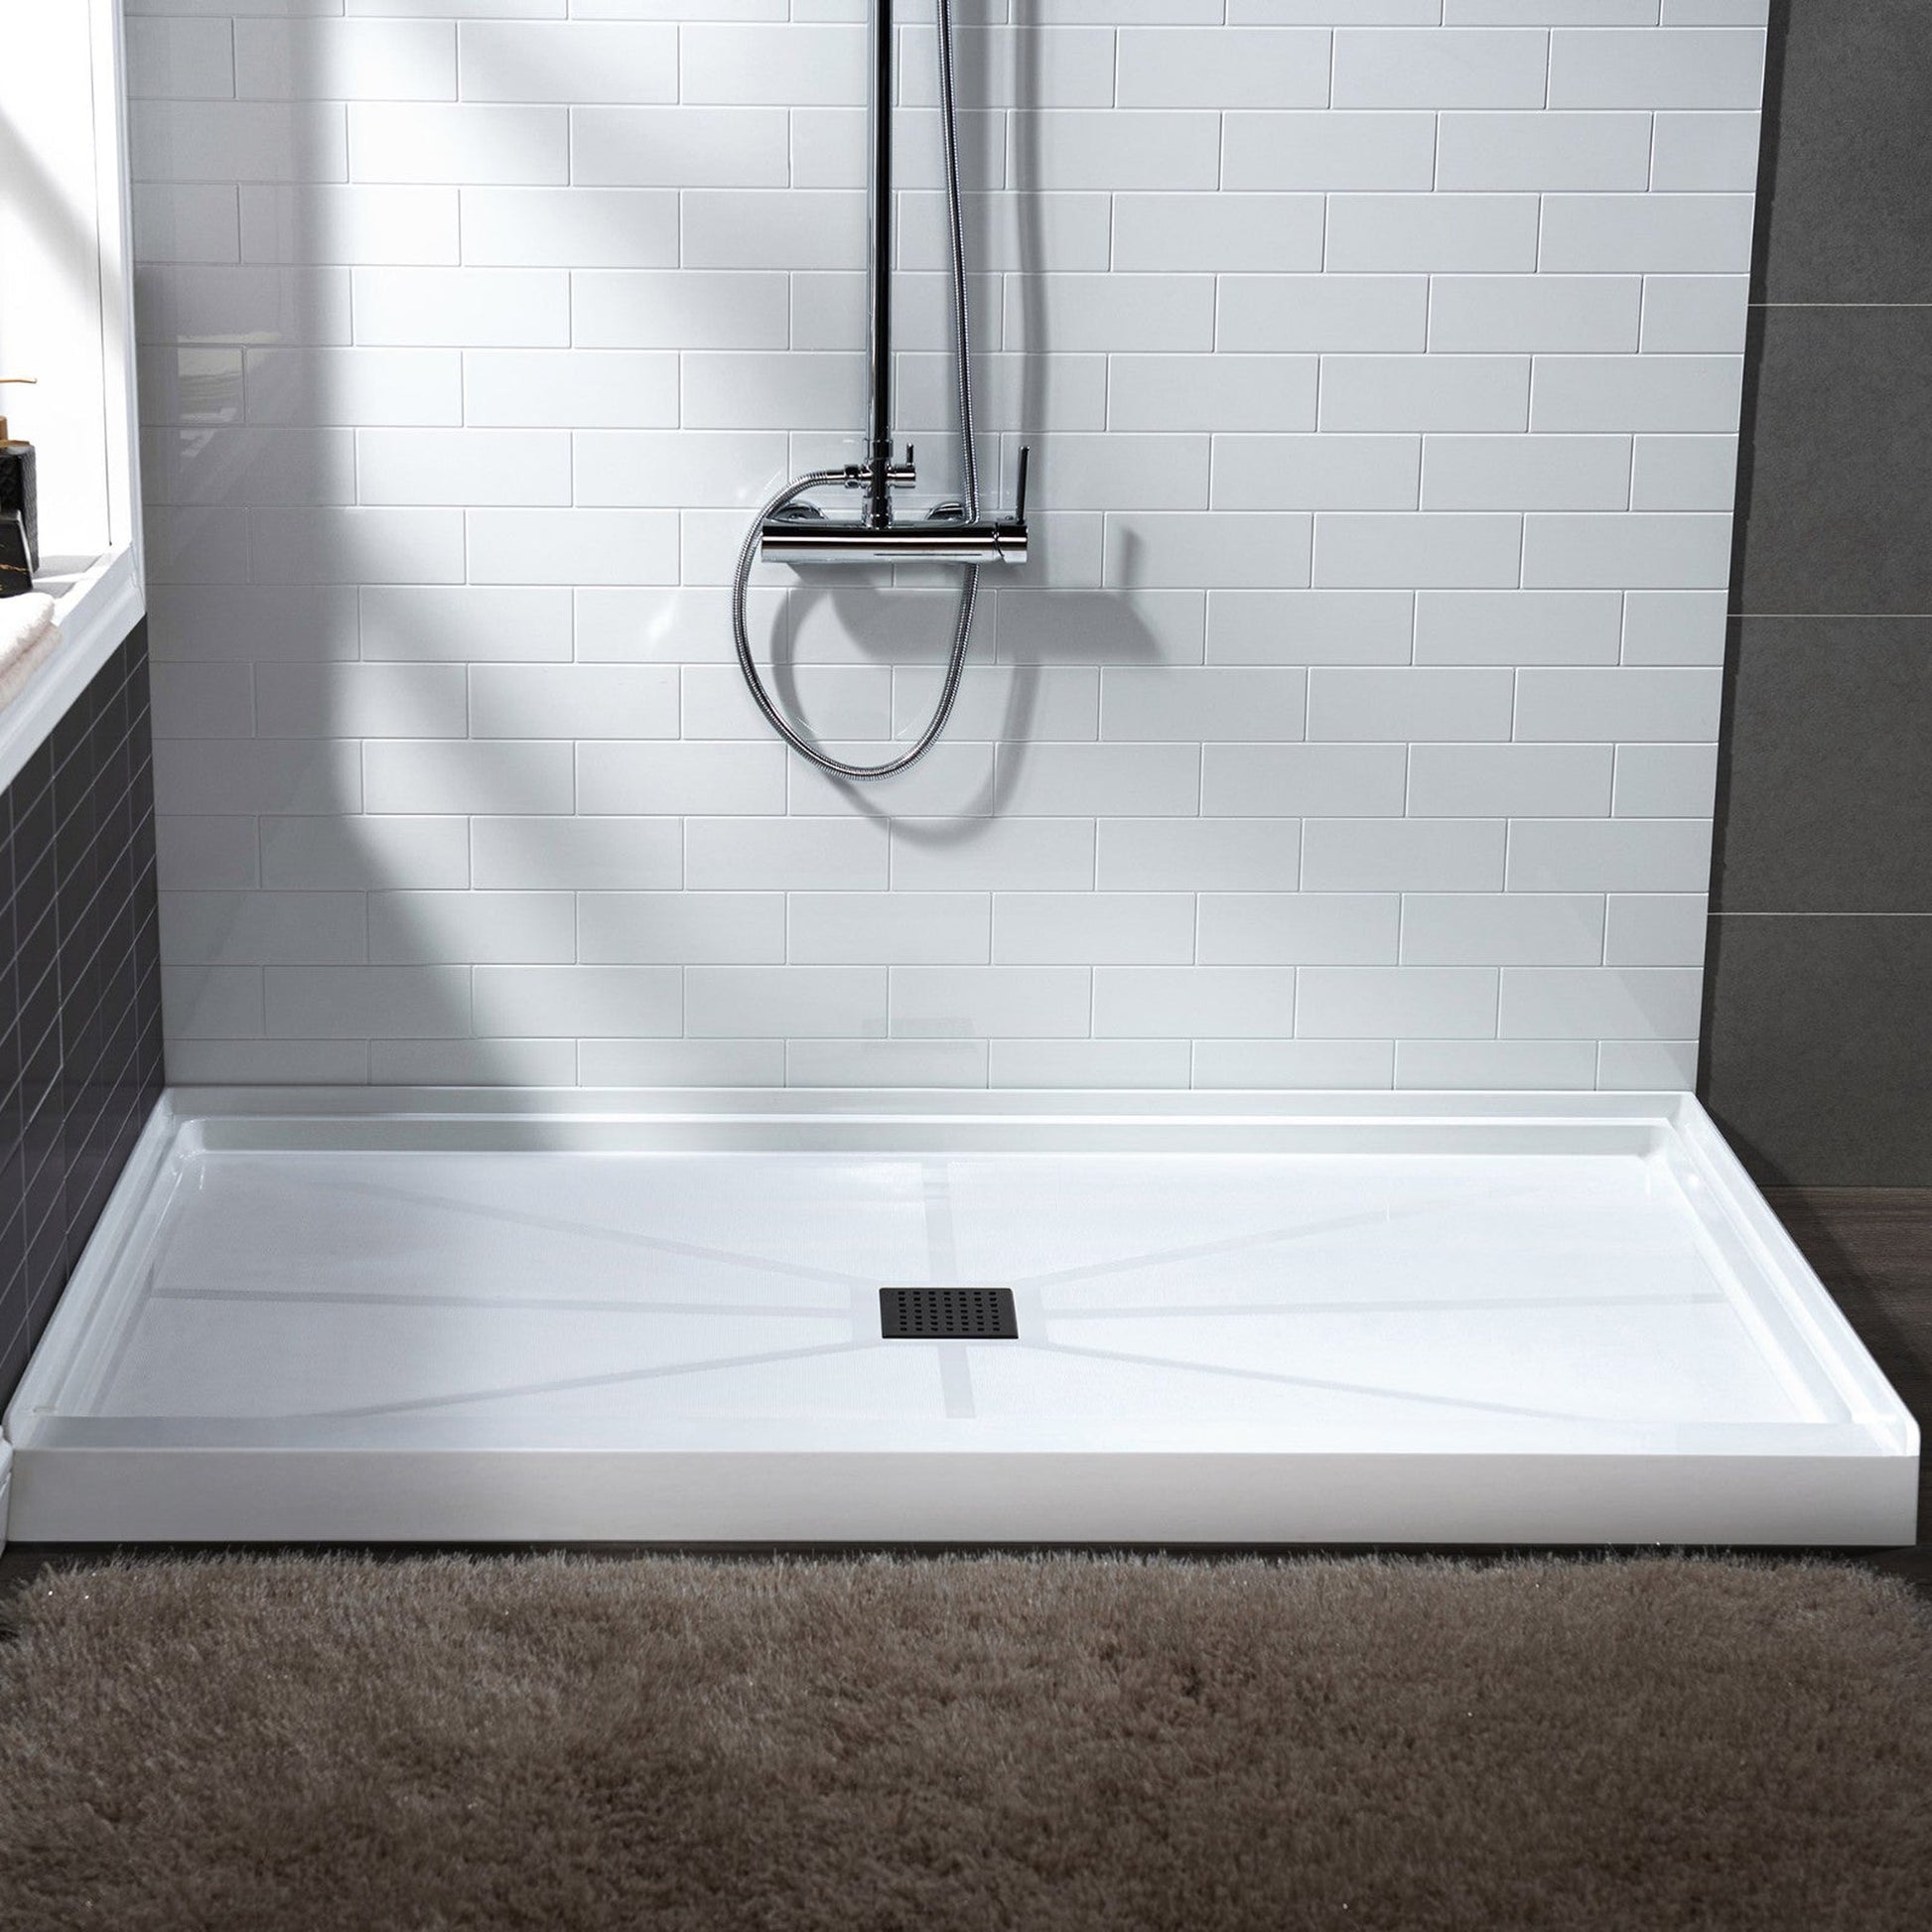 WoodBridge 60" x 30" White Solid Surface Shower Base Center Drain Location With Matte Black Trench Drain Cover